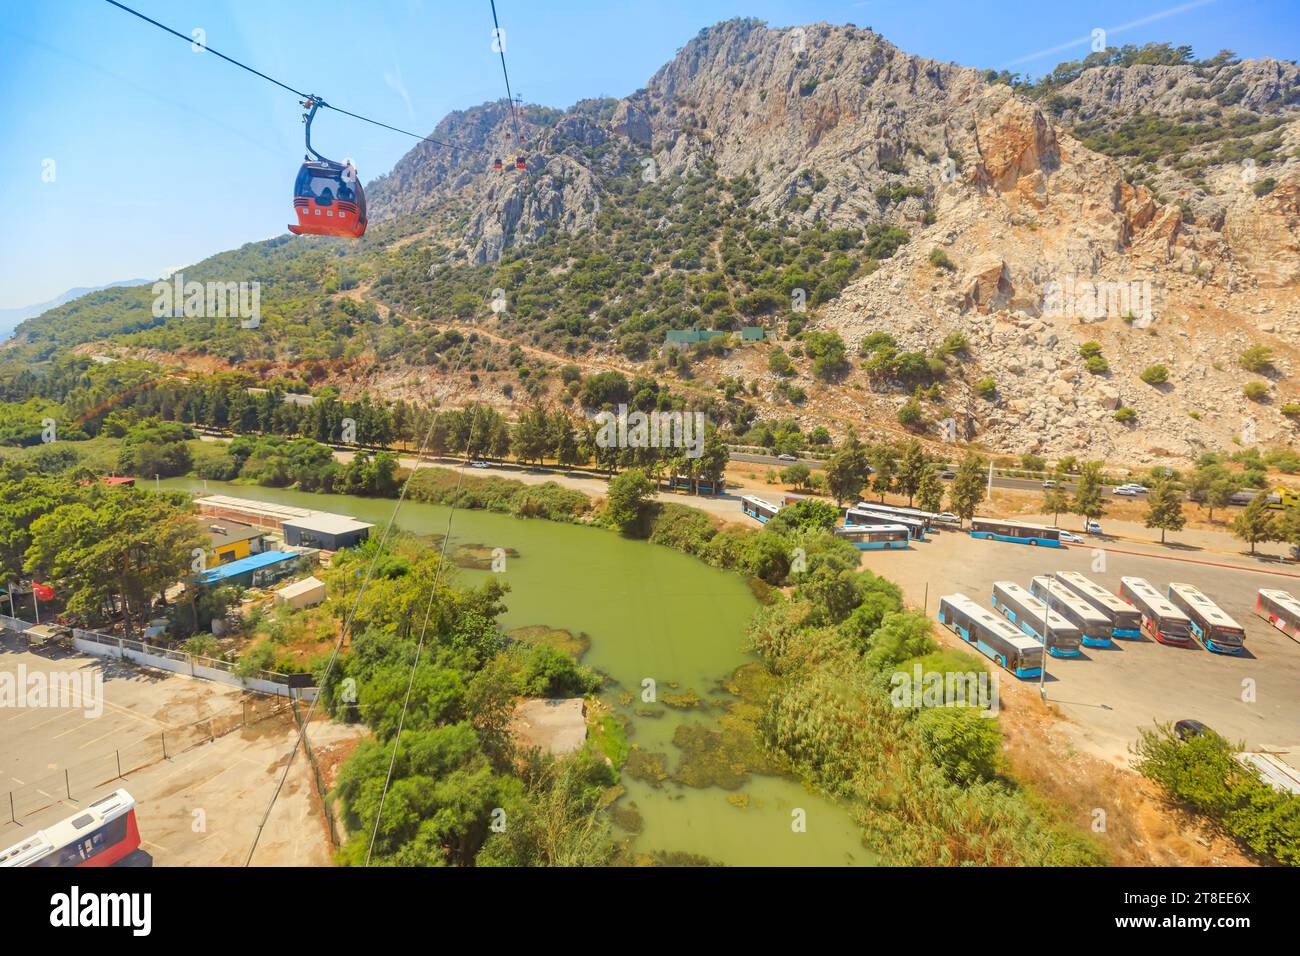 stunning landscape of Antalya, Turkey, a vibrant red cable car glides effortlessly above. Tunektepe mountain peak 605 meters above sea level, unfolds Stock Photo